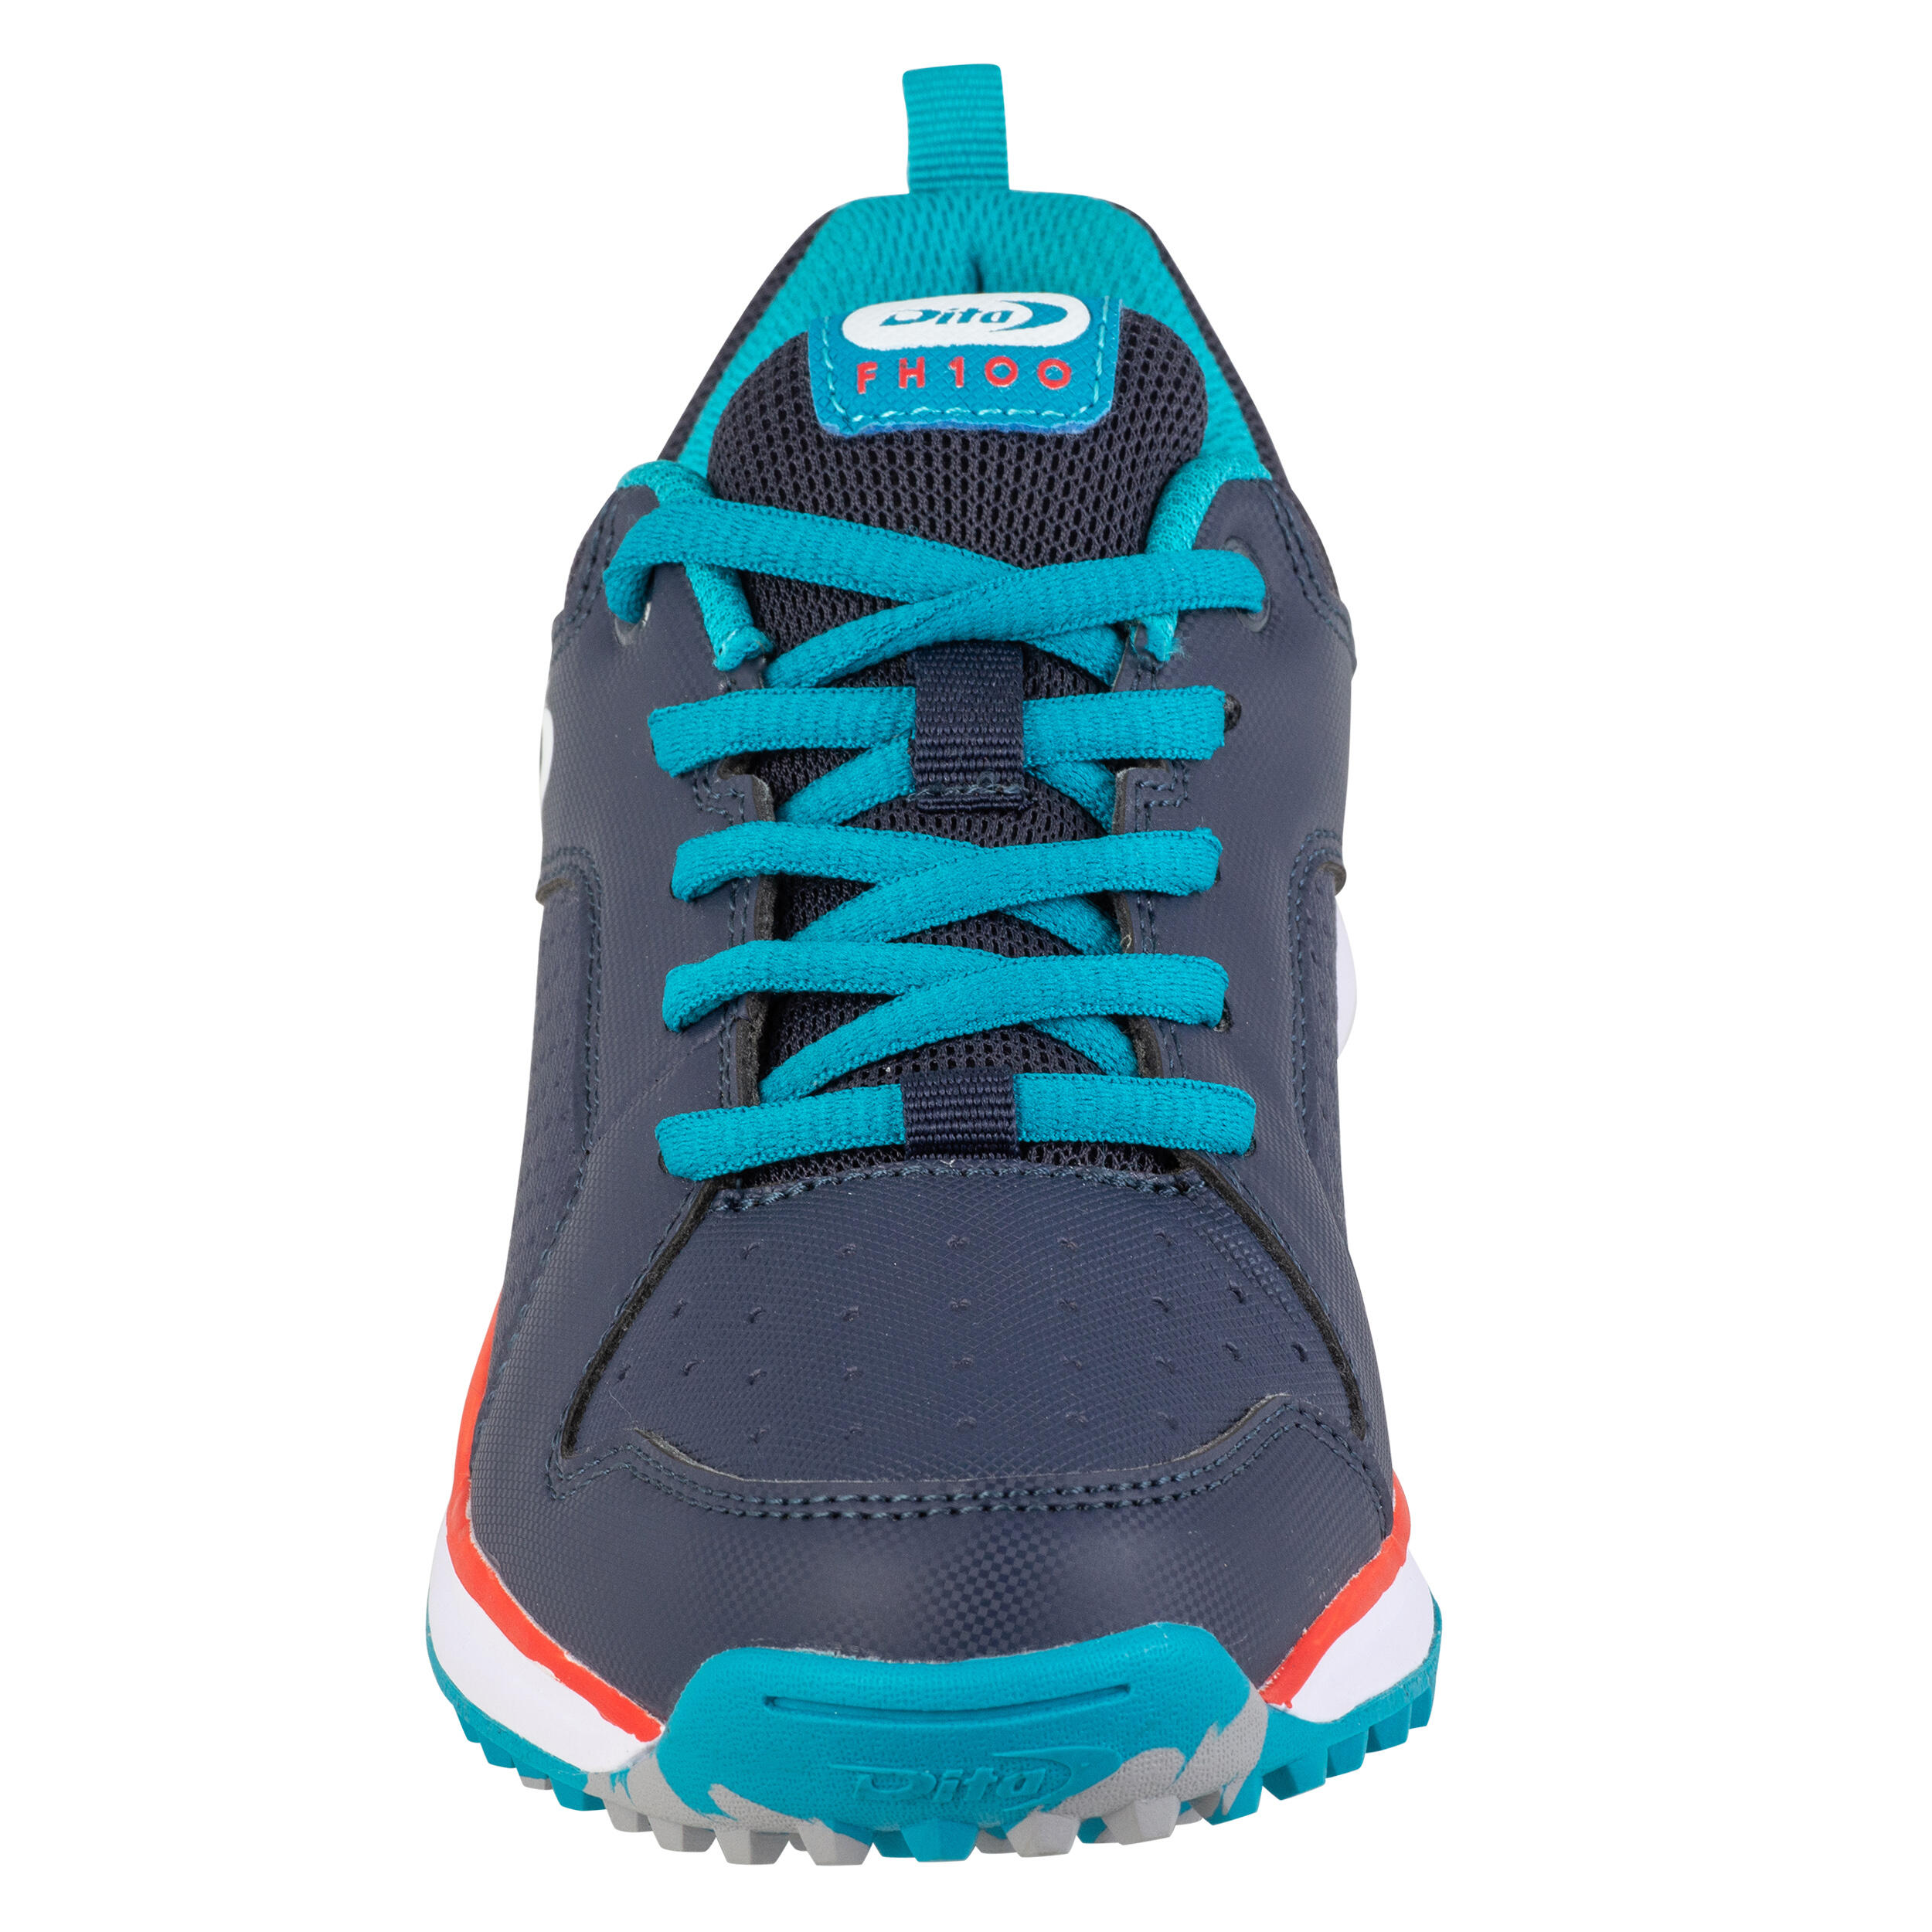 Kids' Low to Moderate-Intensity Field Hockey Shoes DT100 JR - Blue 5/7